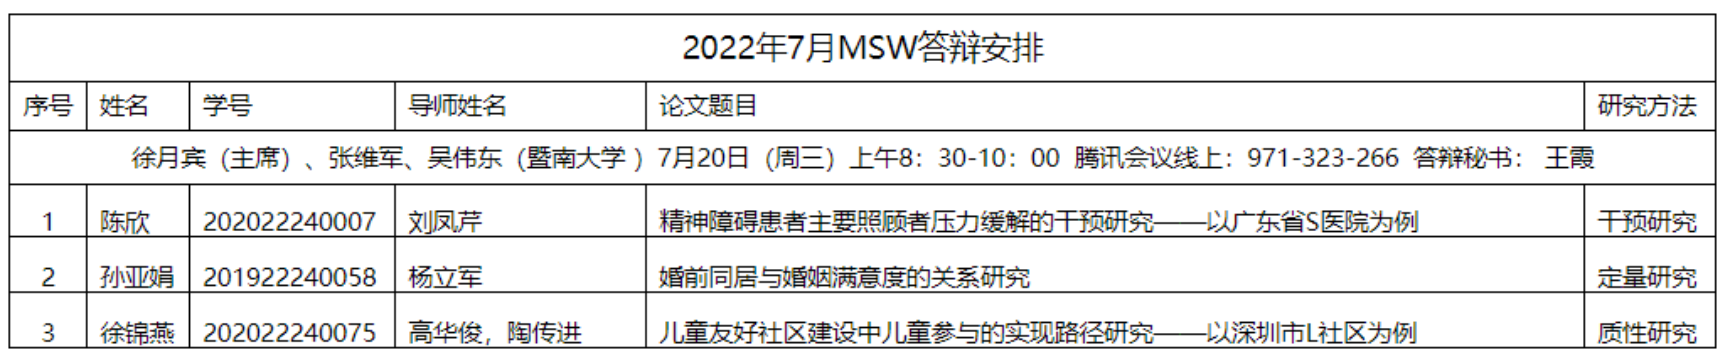 D:\360MoveData\Users\lenovo\Documents\WeChat Files\wxid_9oxuq1hjddpd12\FileStorage\Temp\1658107767143.png